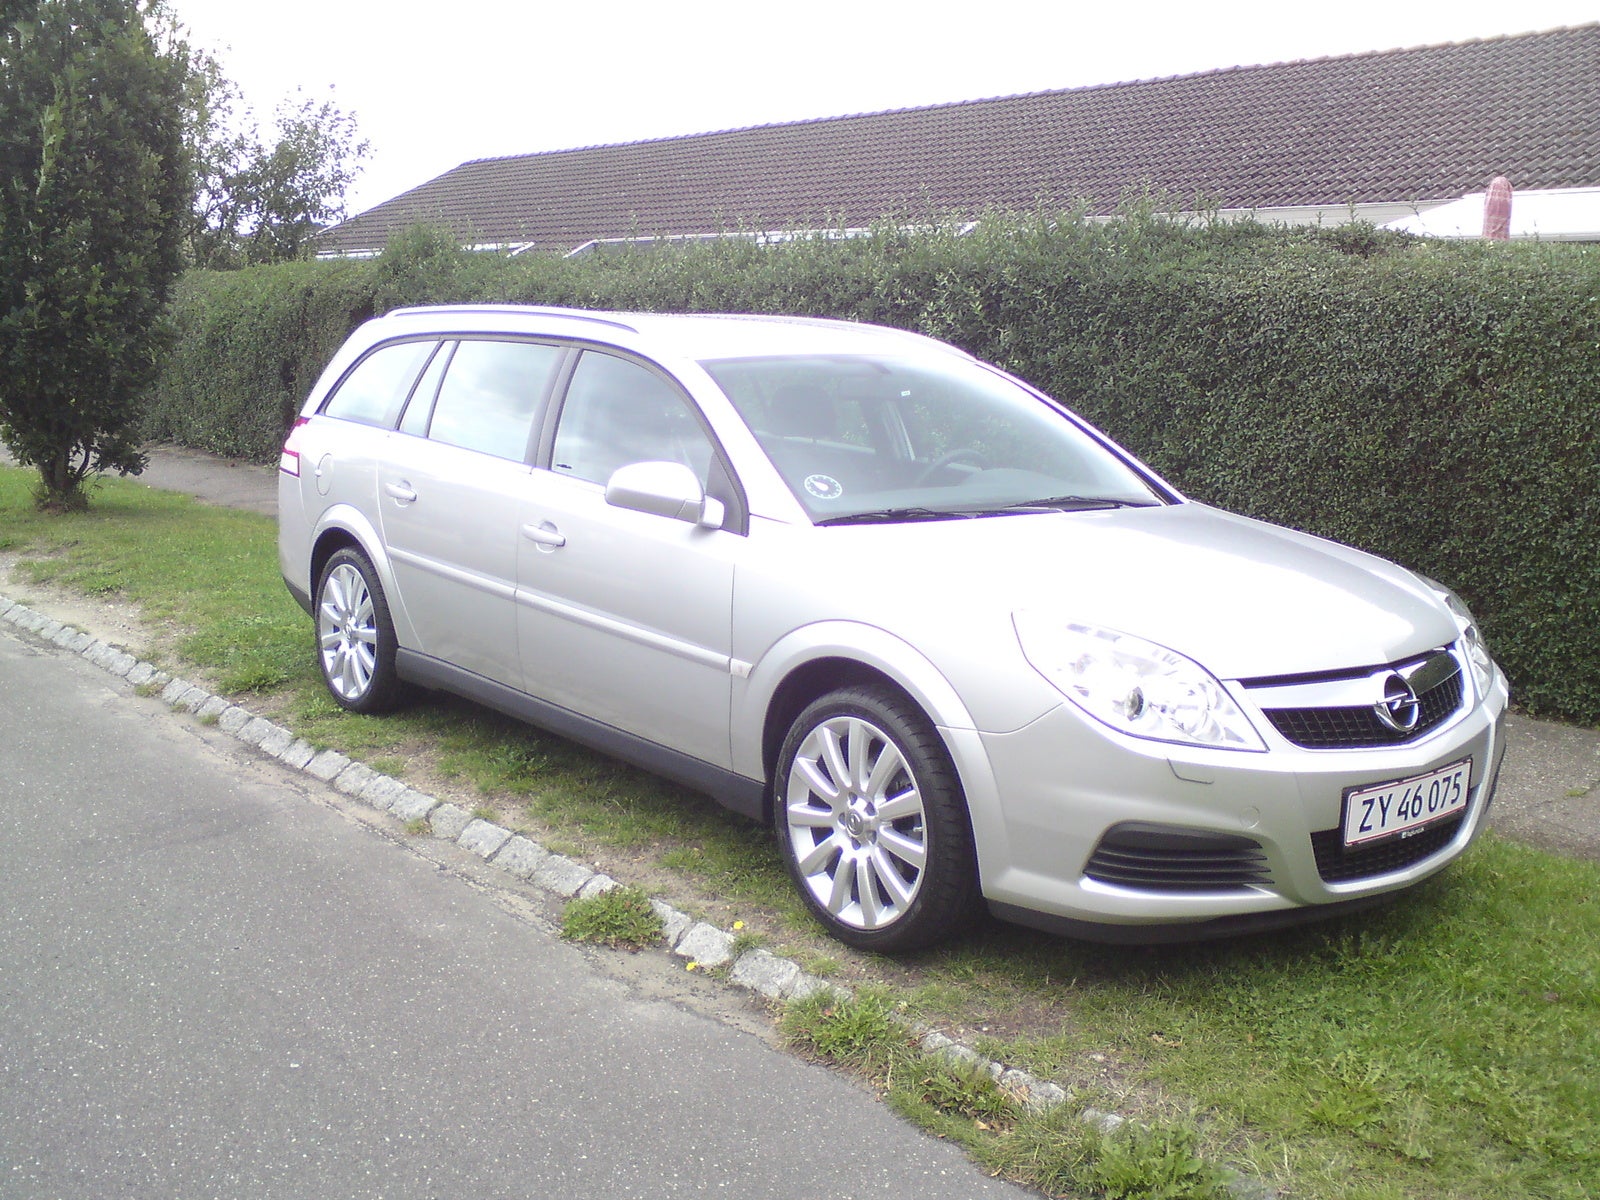 2008 Opel Vectra picture, exterior